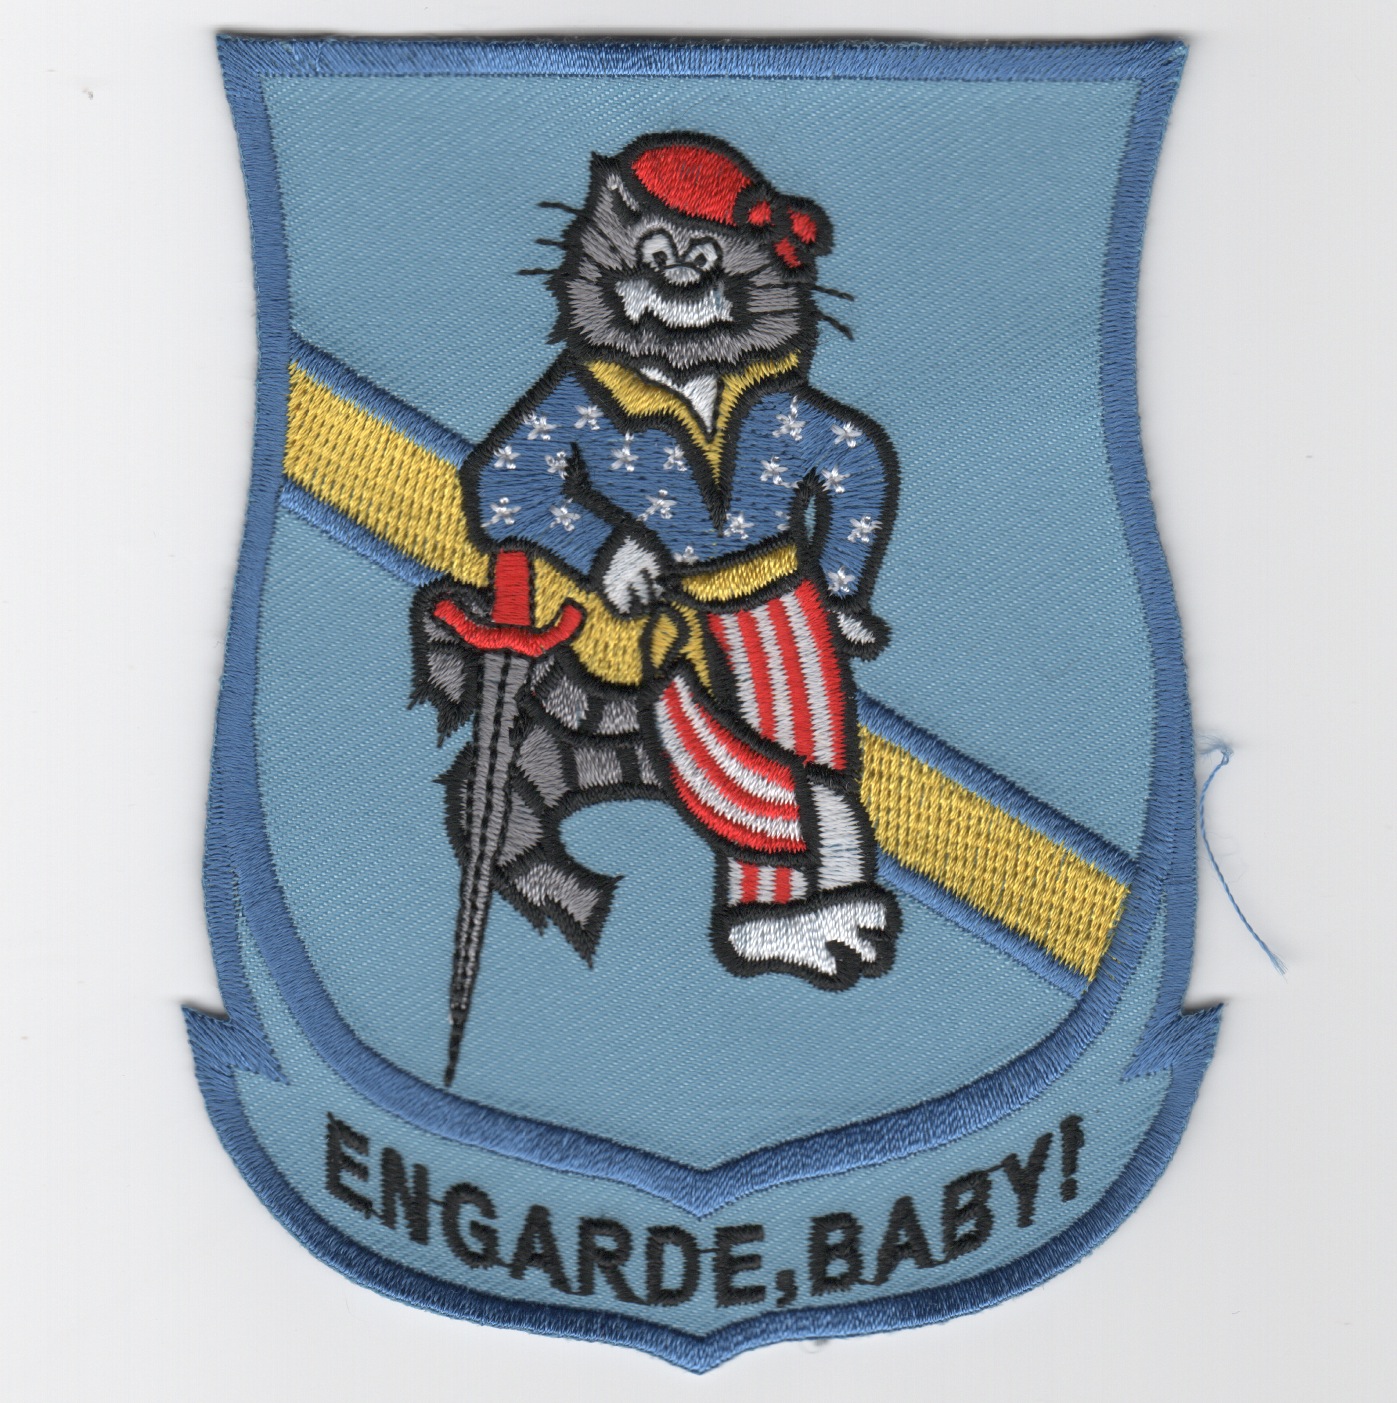 VF-32 'ENGARDE, Baby' Patch (Blue/Shield)